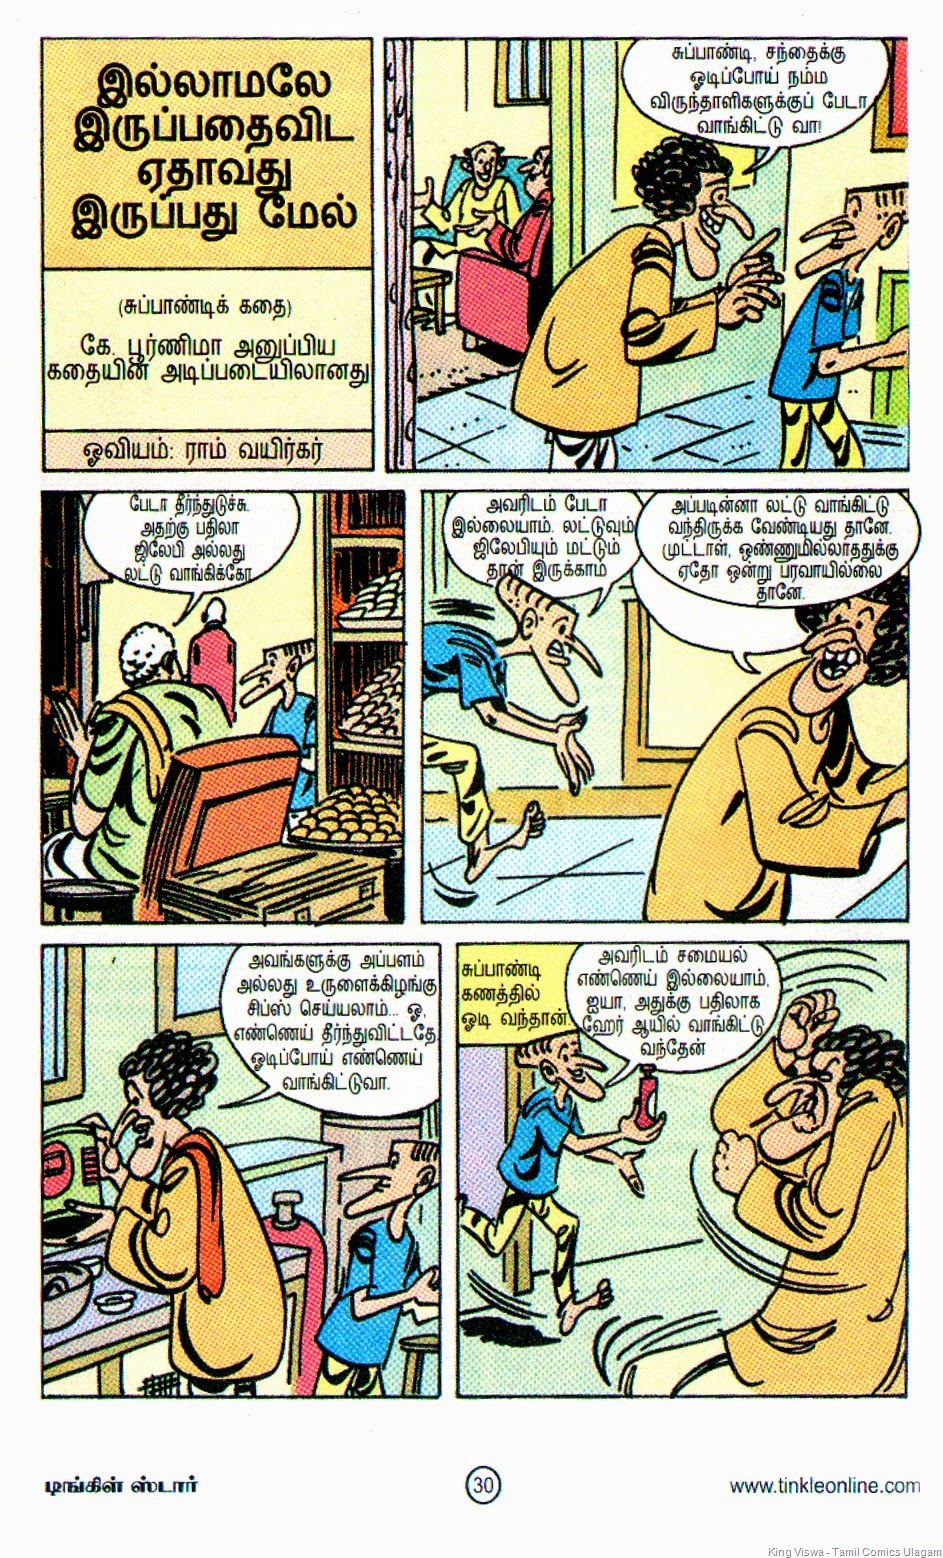 [Tinkle%2520Stars%2520Issue%2520No%25202%2520Dated%252001032015%2520Suppandi%2520Page%2520No%252030%255B7%255D.jpg]